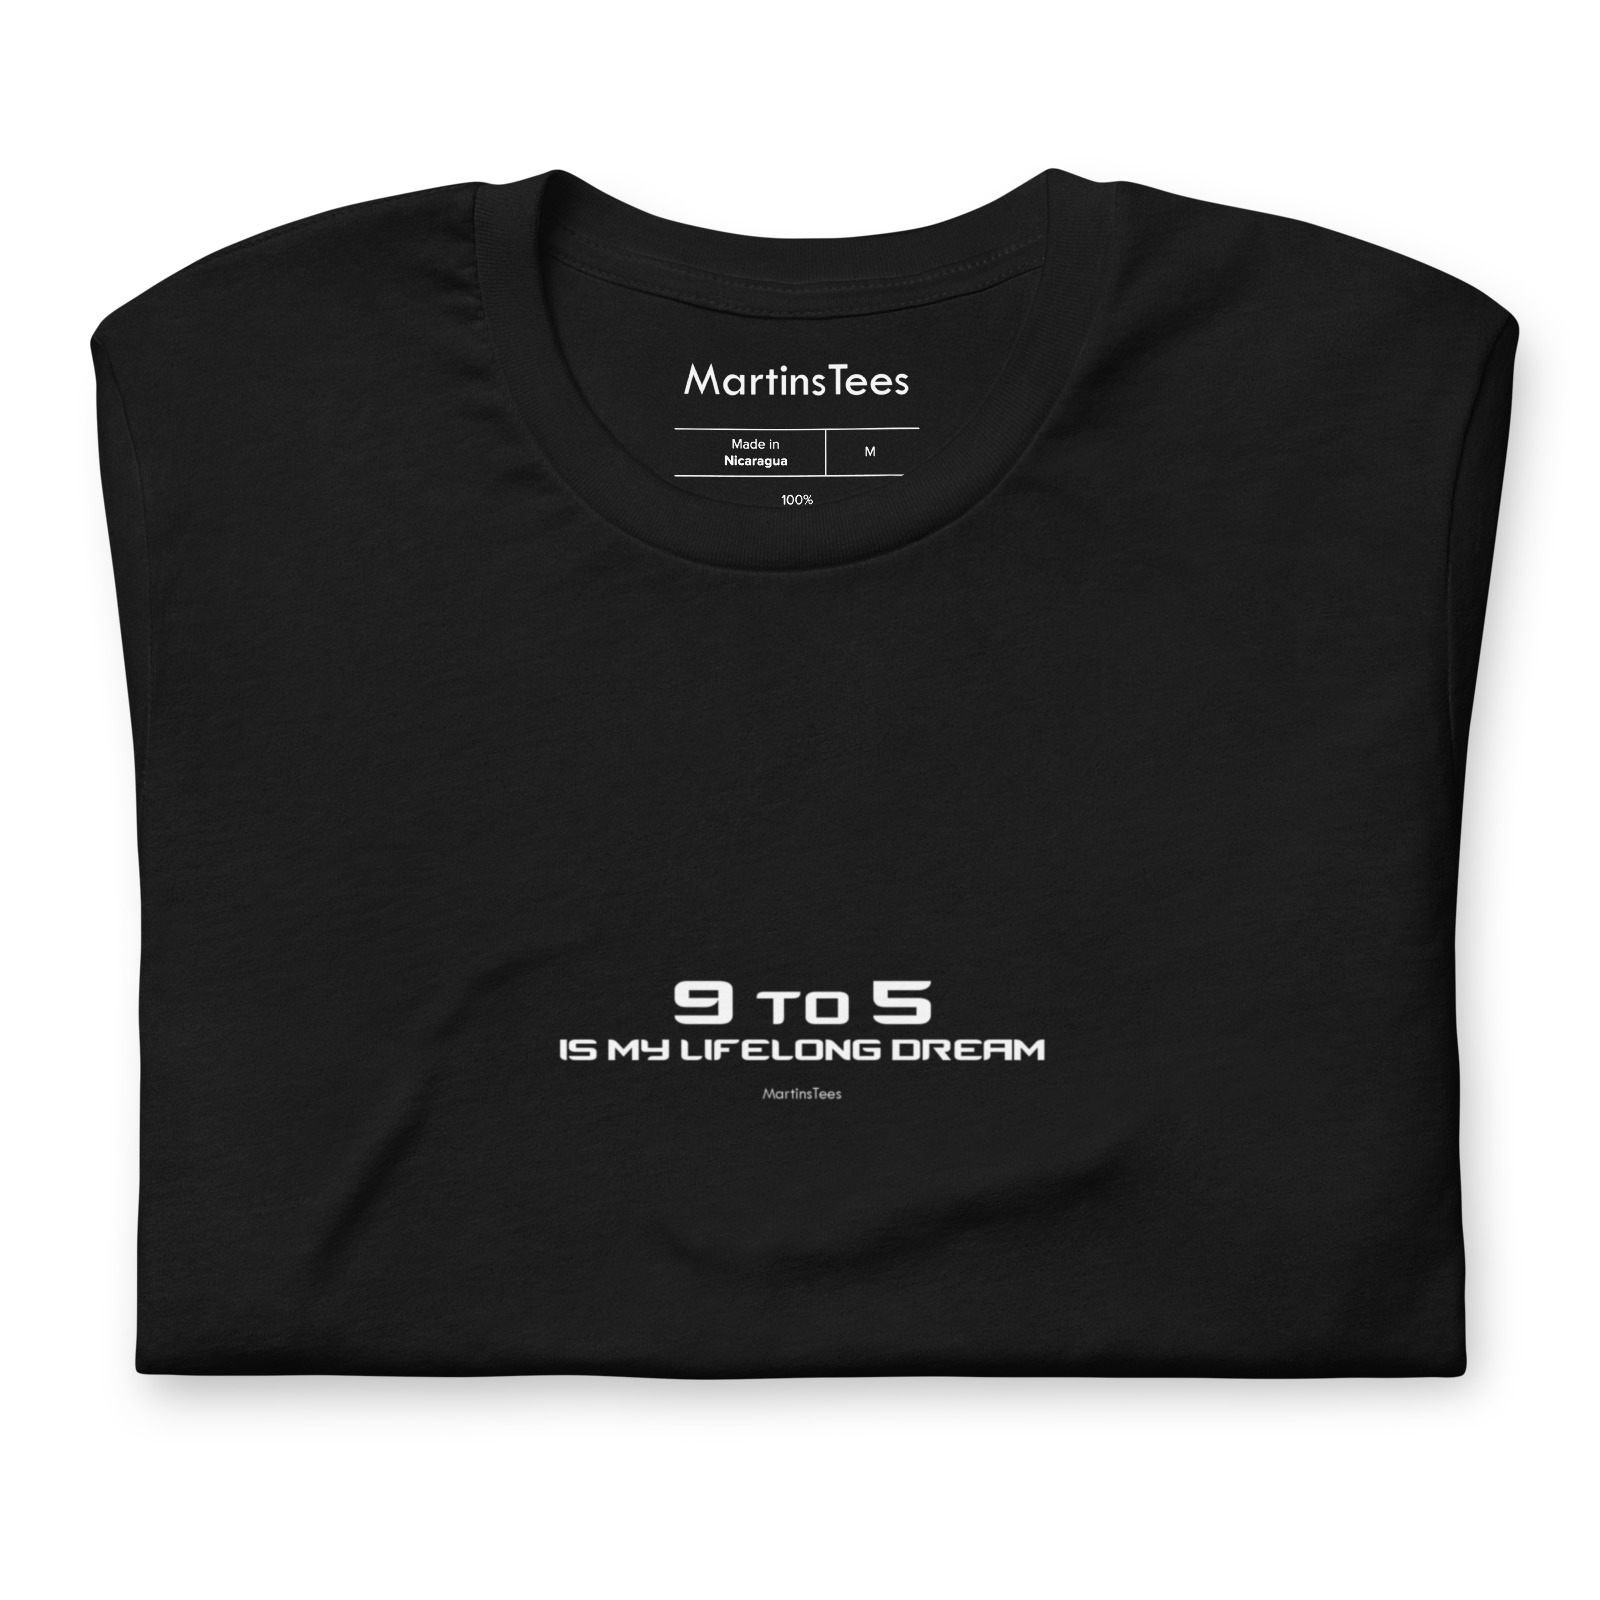 T-shirt: 9 to 5 - IS MY LIFELONG DREAM